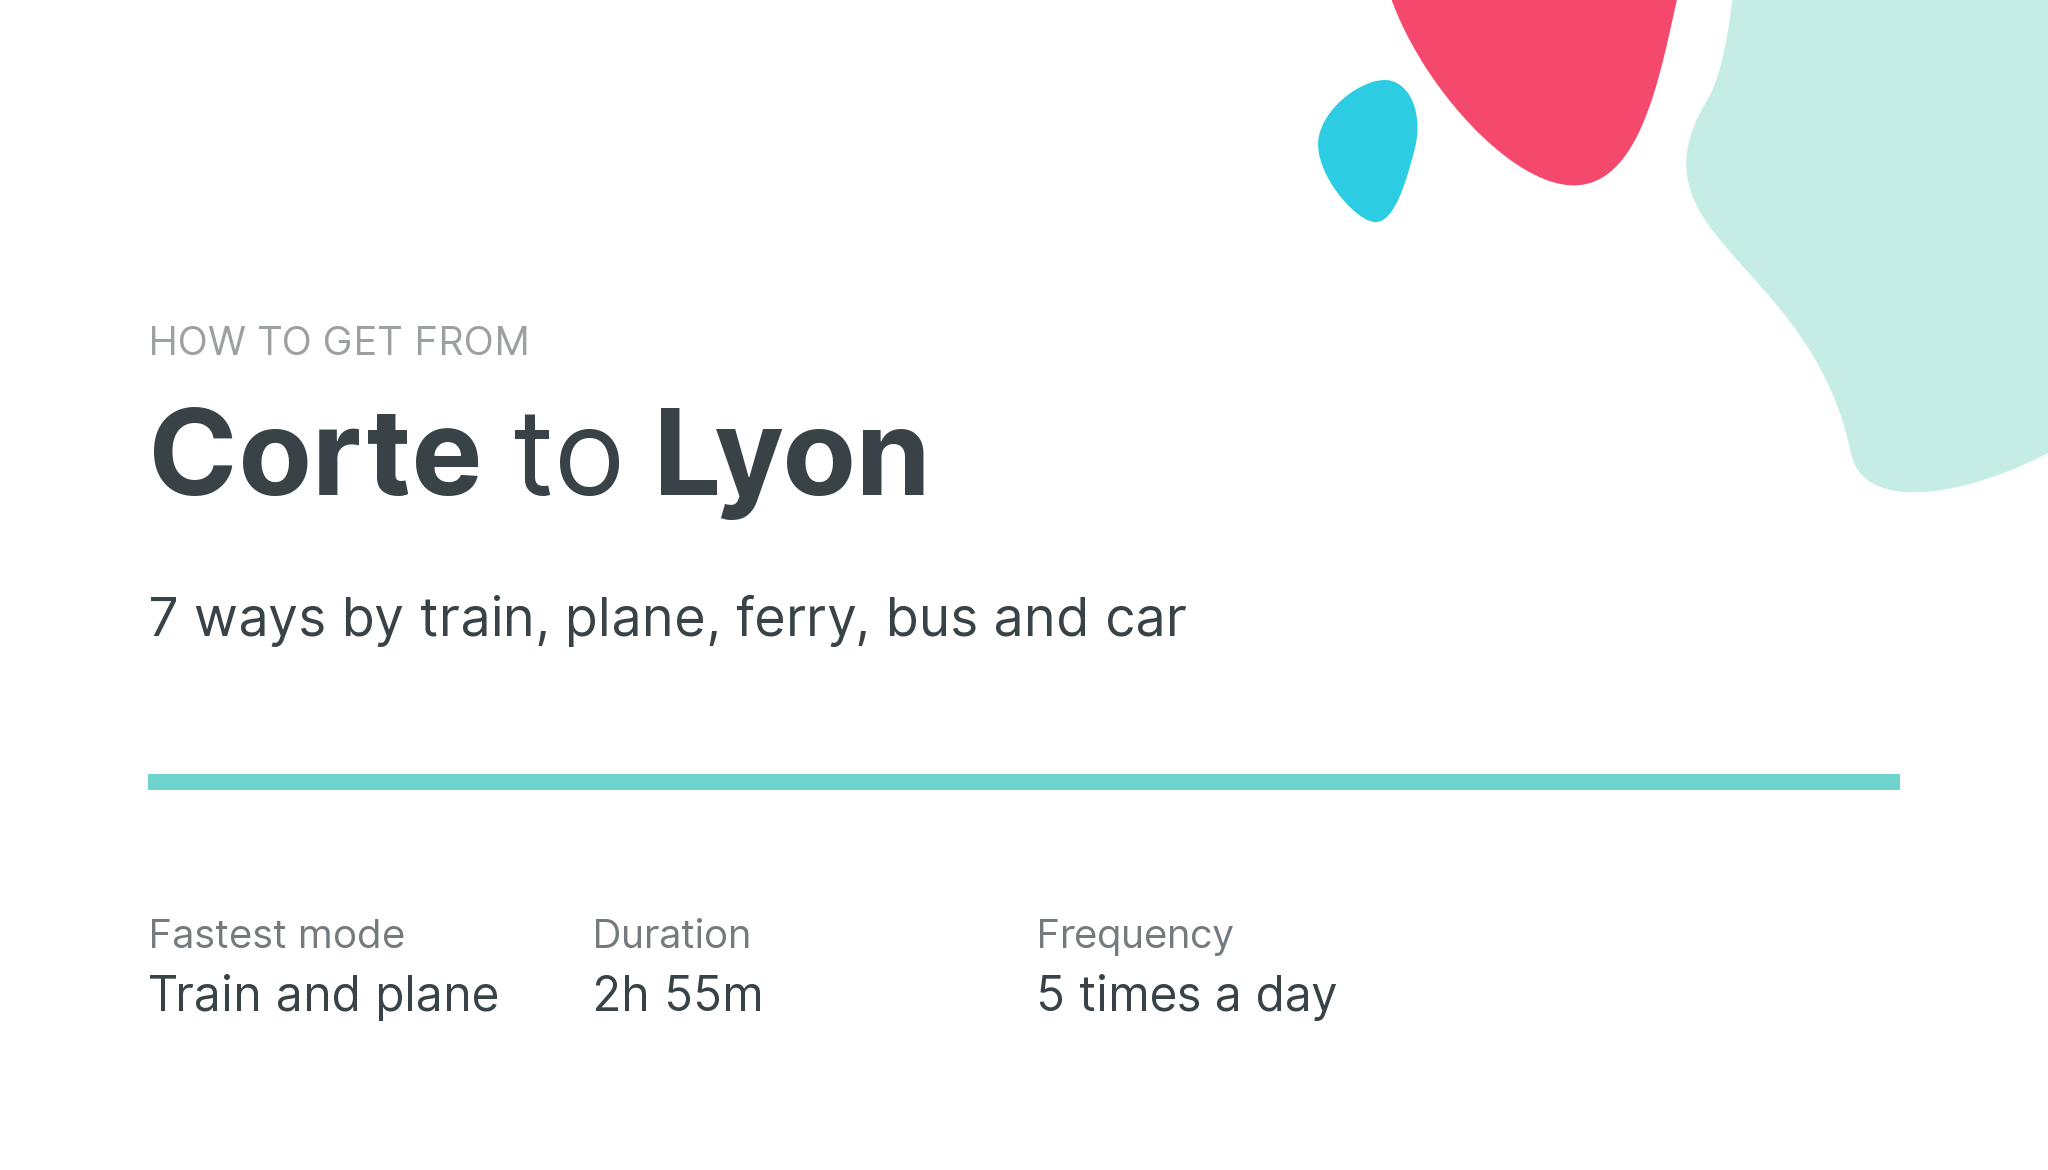 How do I get from Corte to Lyon